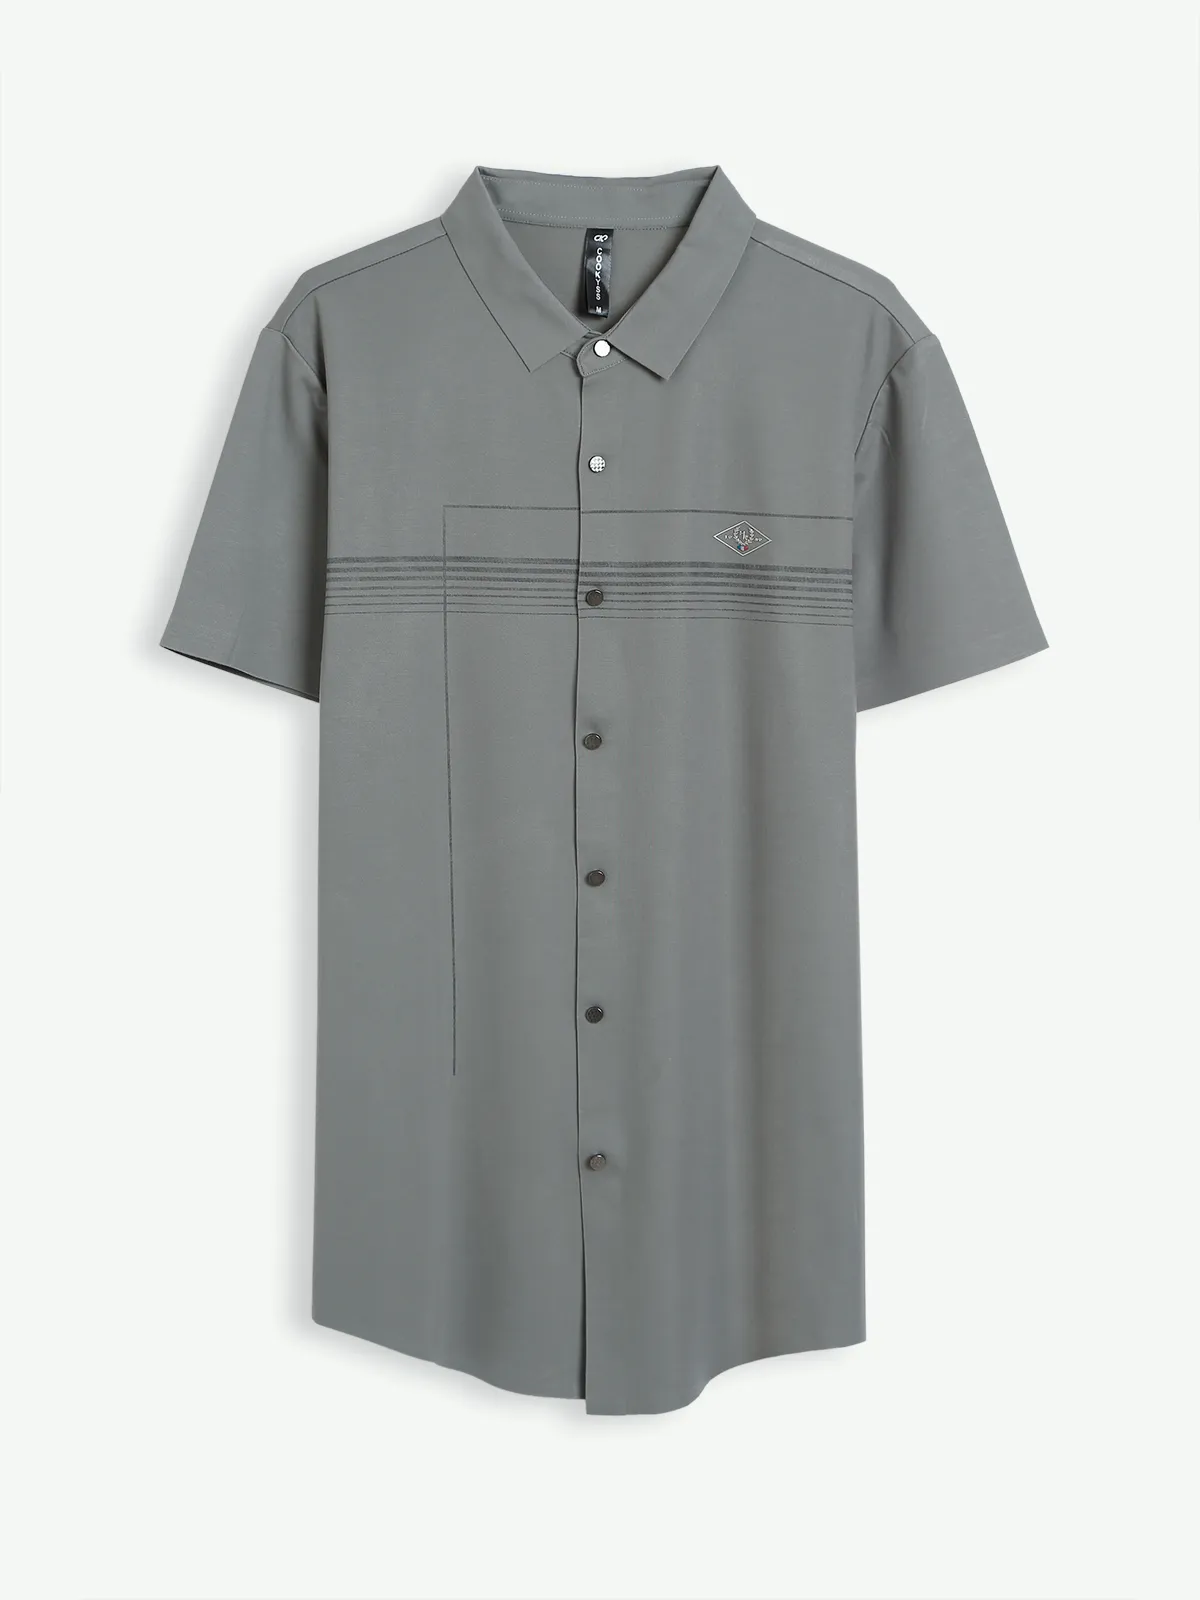 Cookyss grey cotton half sleeves shirt